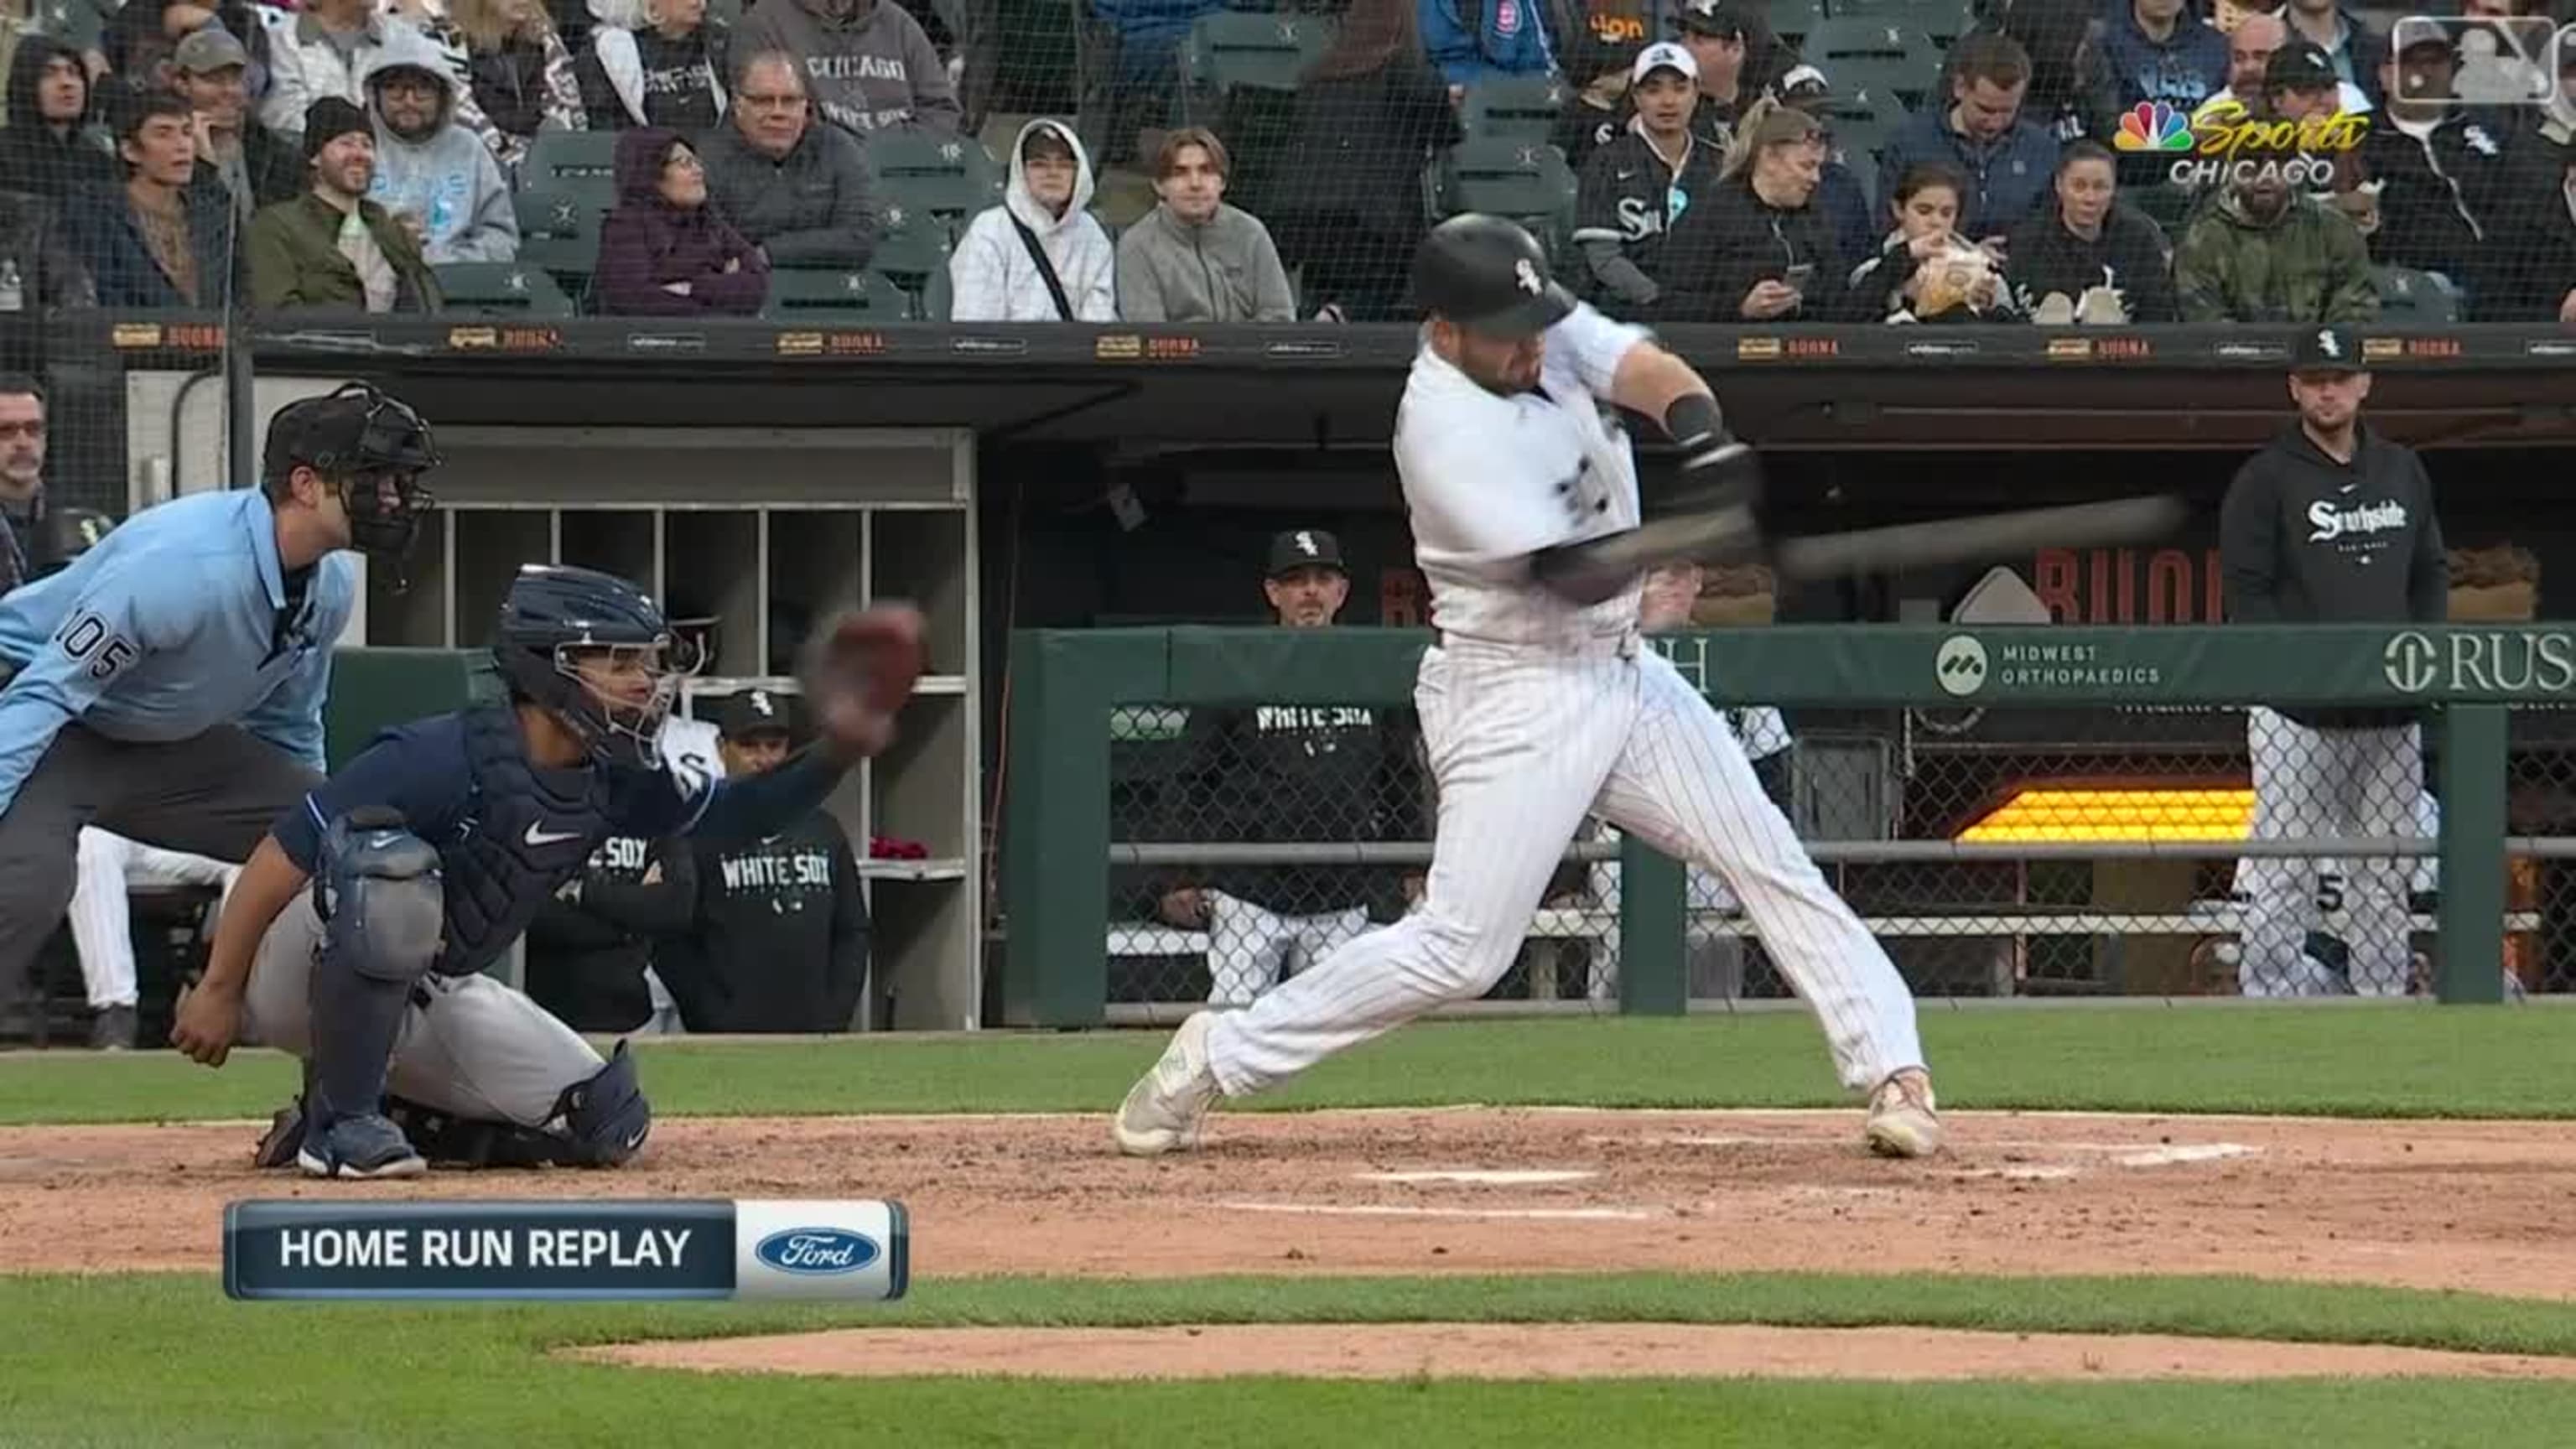 Jake Burger first to try on jacket in White Sox new home run celebration